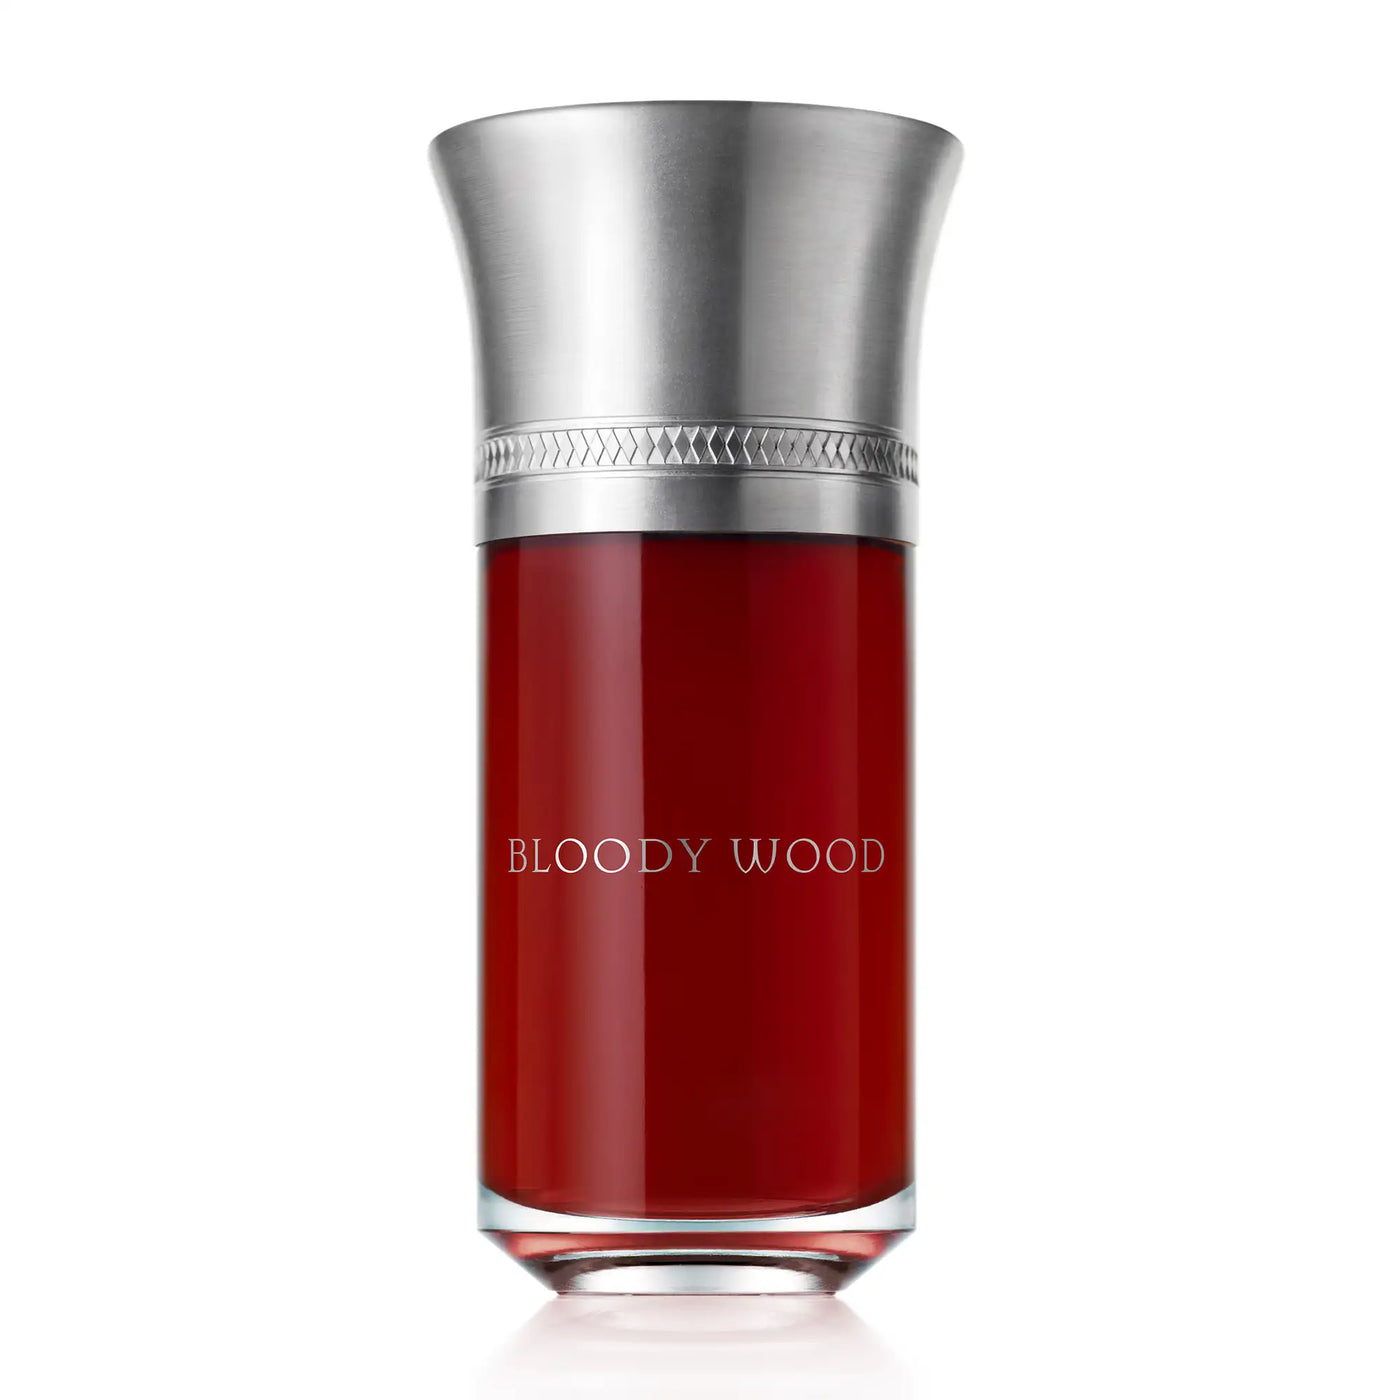 Liquides Imaginaires Bloody Wood - 100ml - Gharyal by Collectibles 